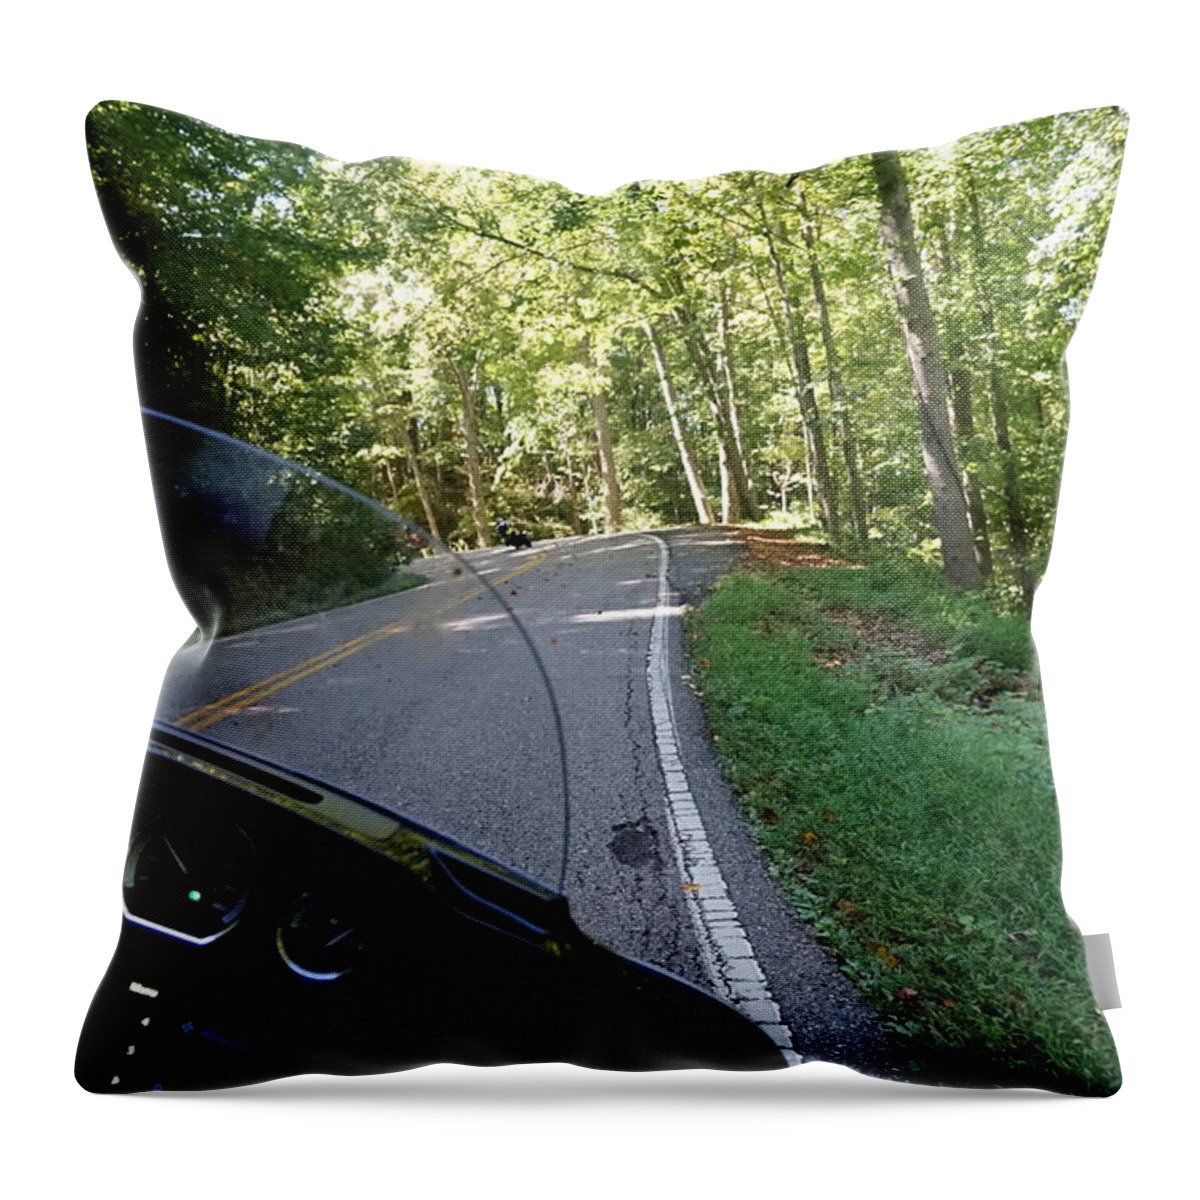 Deals Gap Throw Pillow featuring the photograph Dragon Curves by Laurie Perry